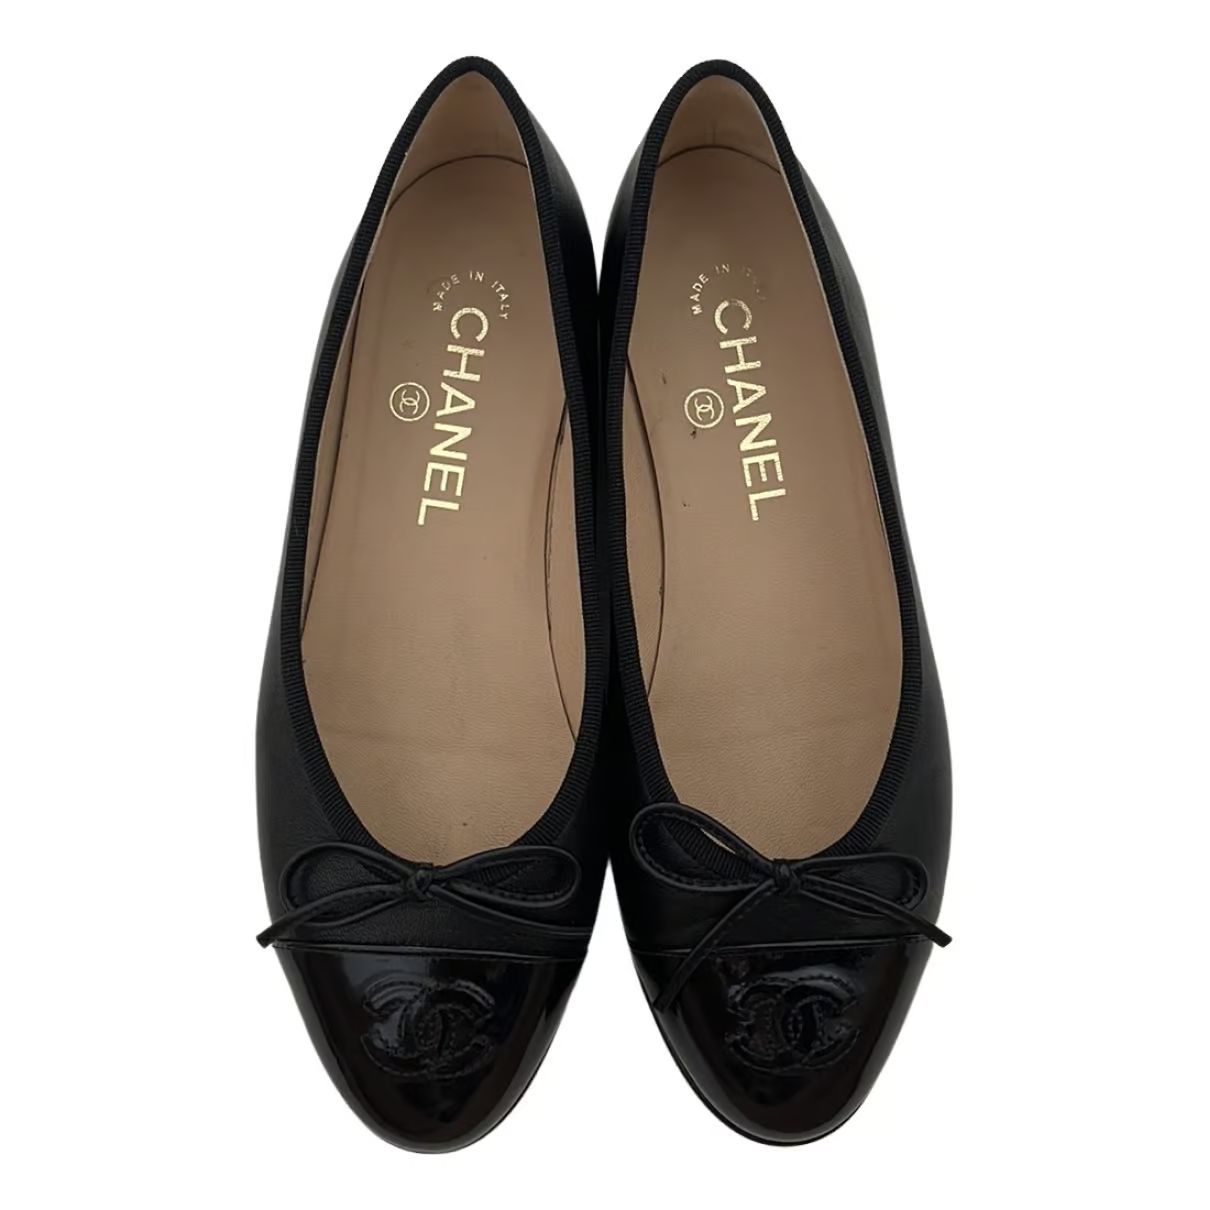 Leather ballet flats Chanel Black size 36.5 EU in Leather - 34902156 | Vestiaire Collective (Global)